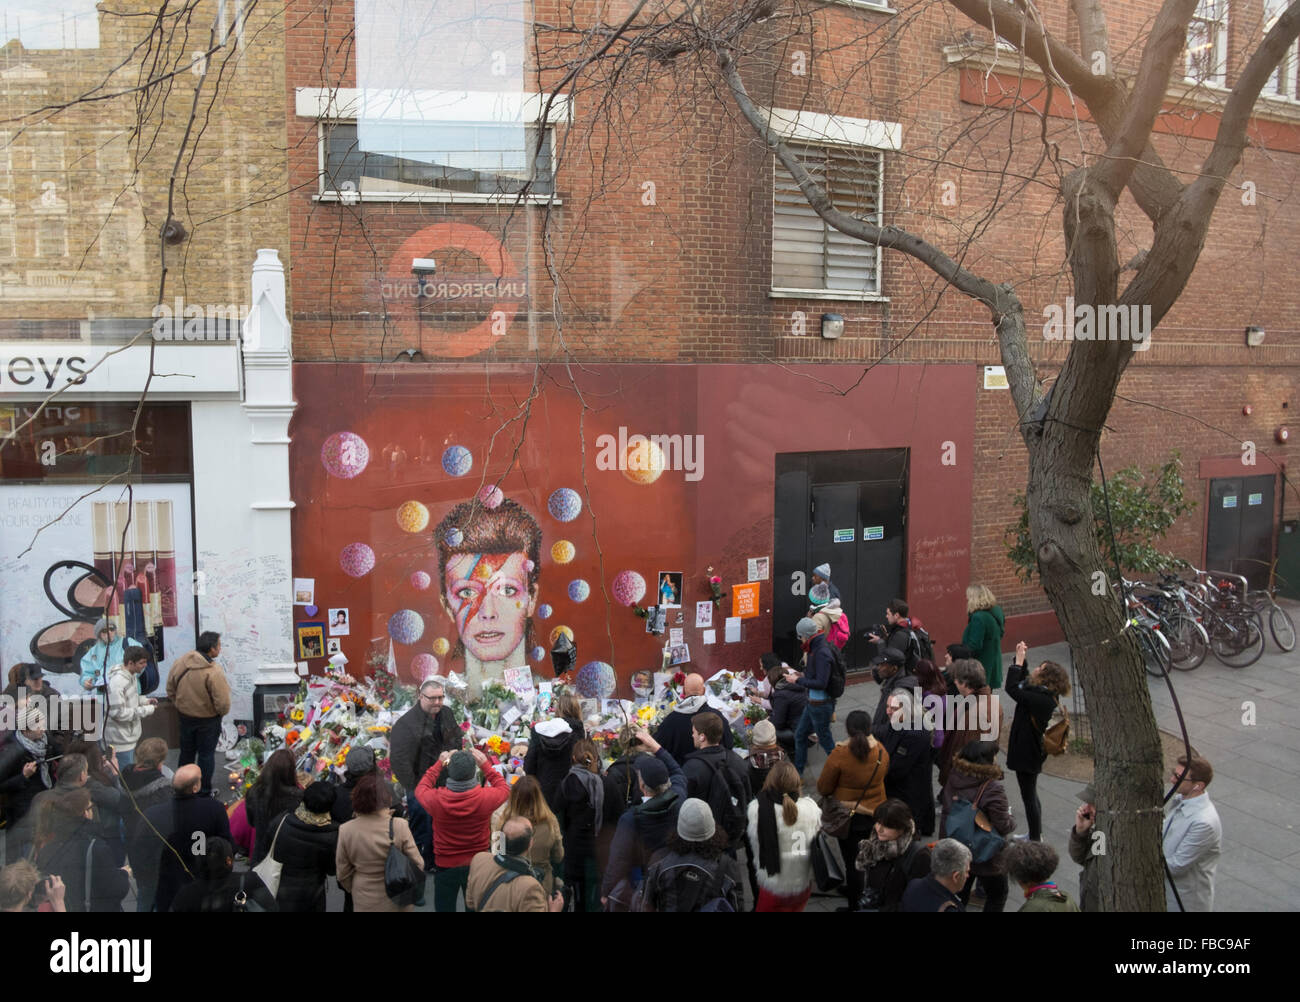 London, UK. 13th Jan, 2016.  Fans pay tribute to David Bowie at a mural in Brixton where he was born. Jimmy C Graffiti. David Bowie  died of cancer at the age of 69 on January 10th 2016.  London,13/01/16 Credit:  claire doherty/Alamy Live News Stock Photo